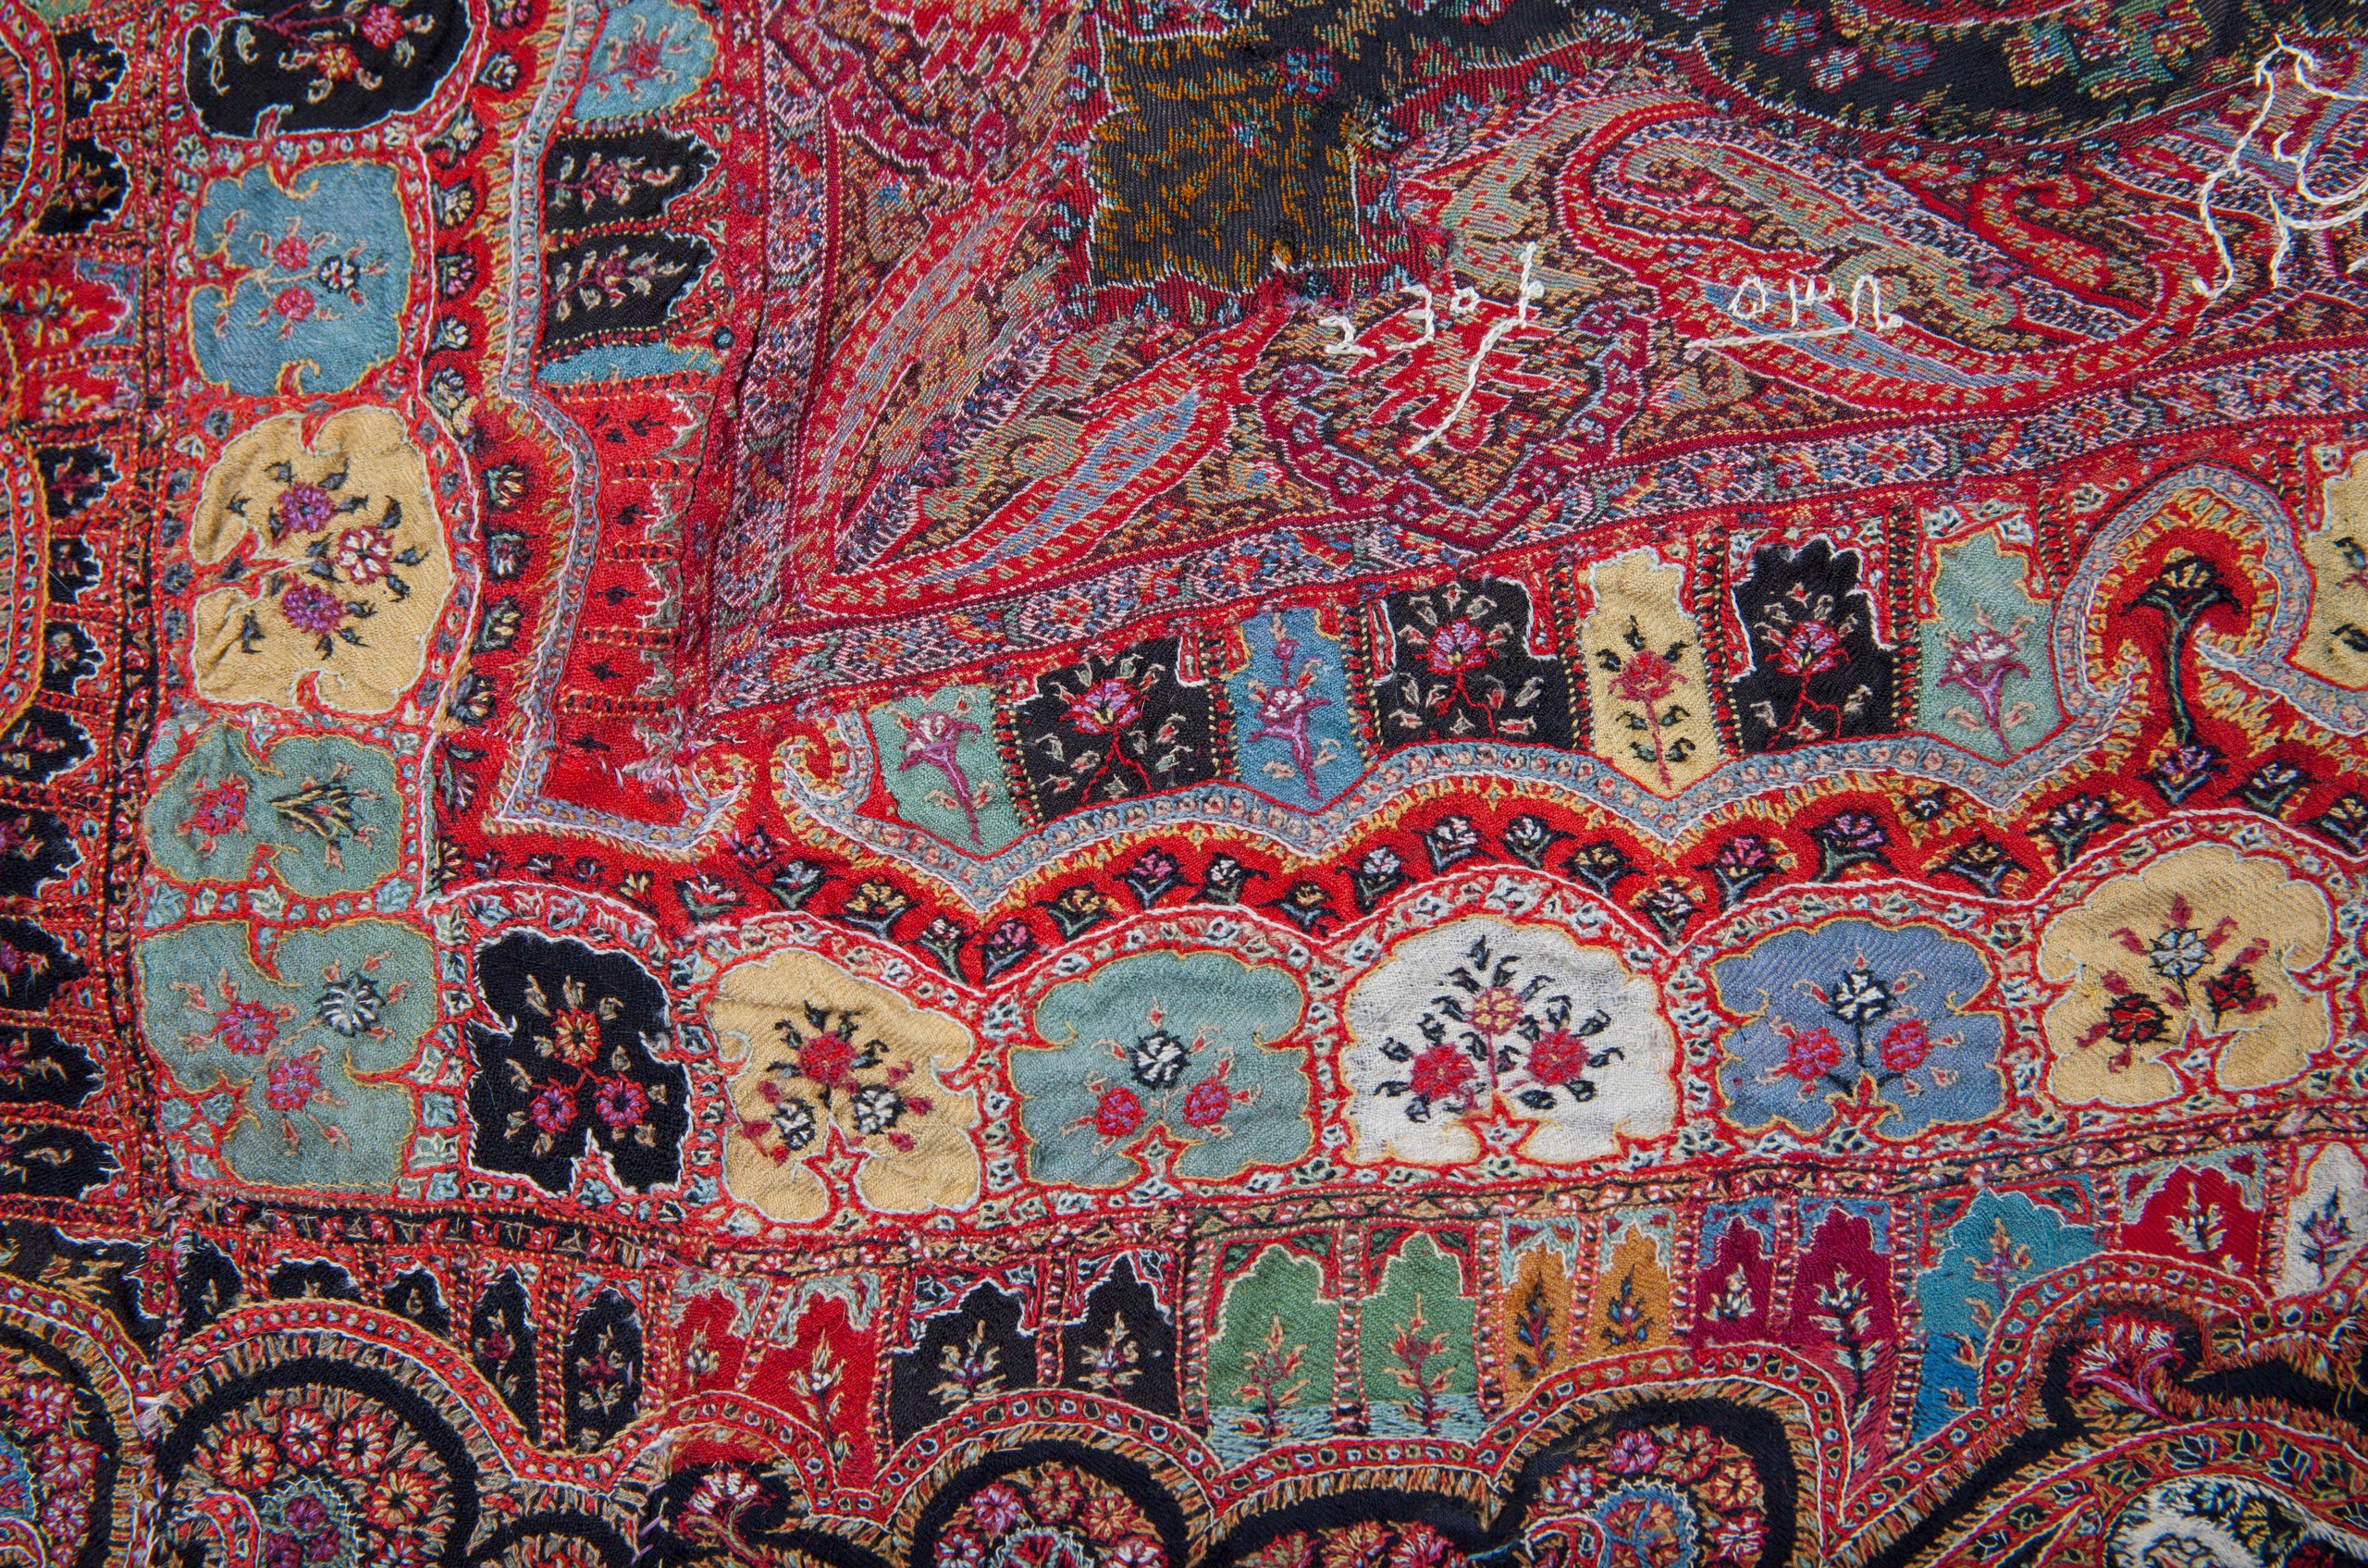 Pieced tapestry woven shawl, Kashmir